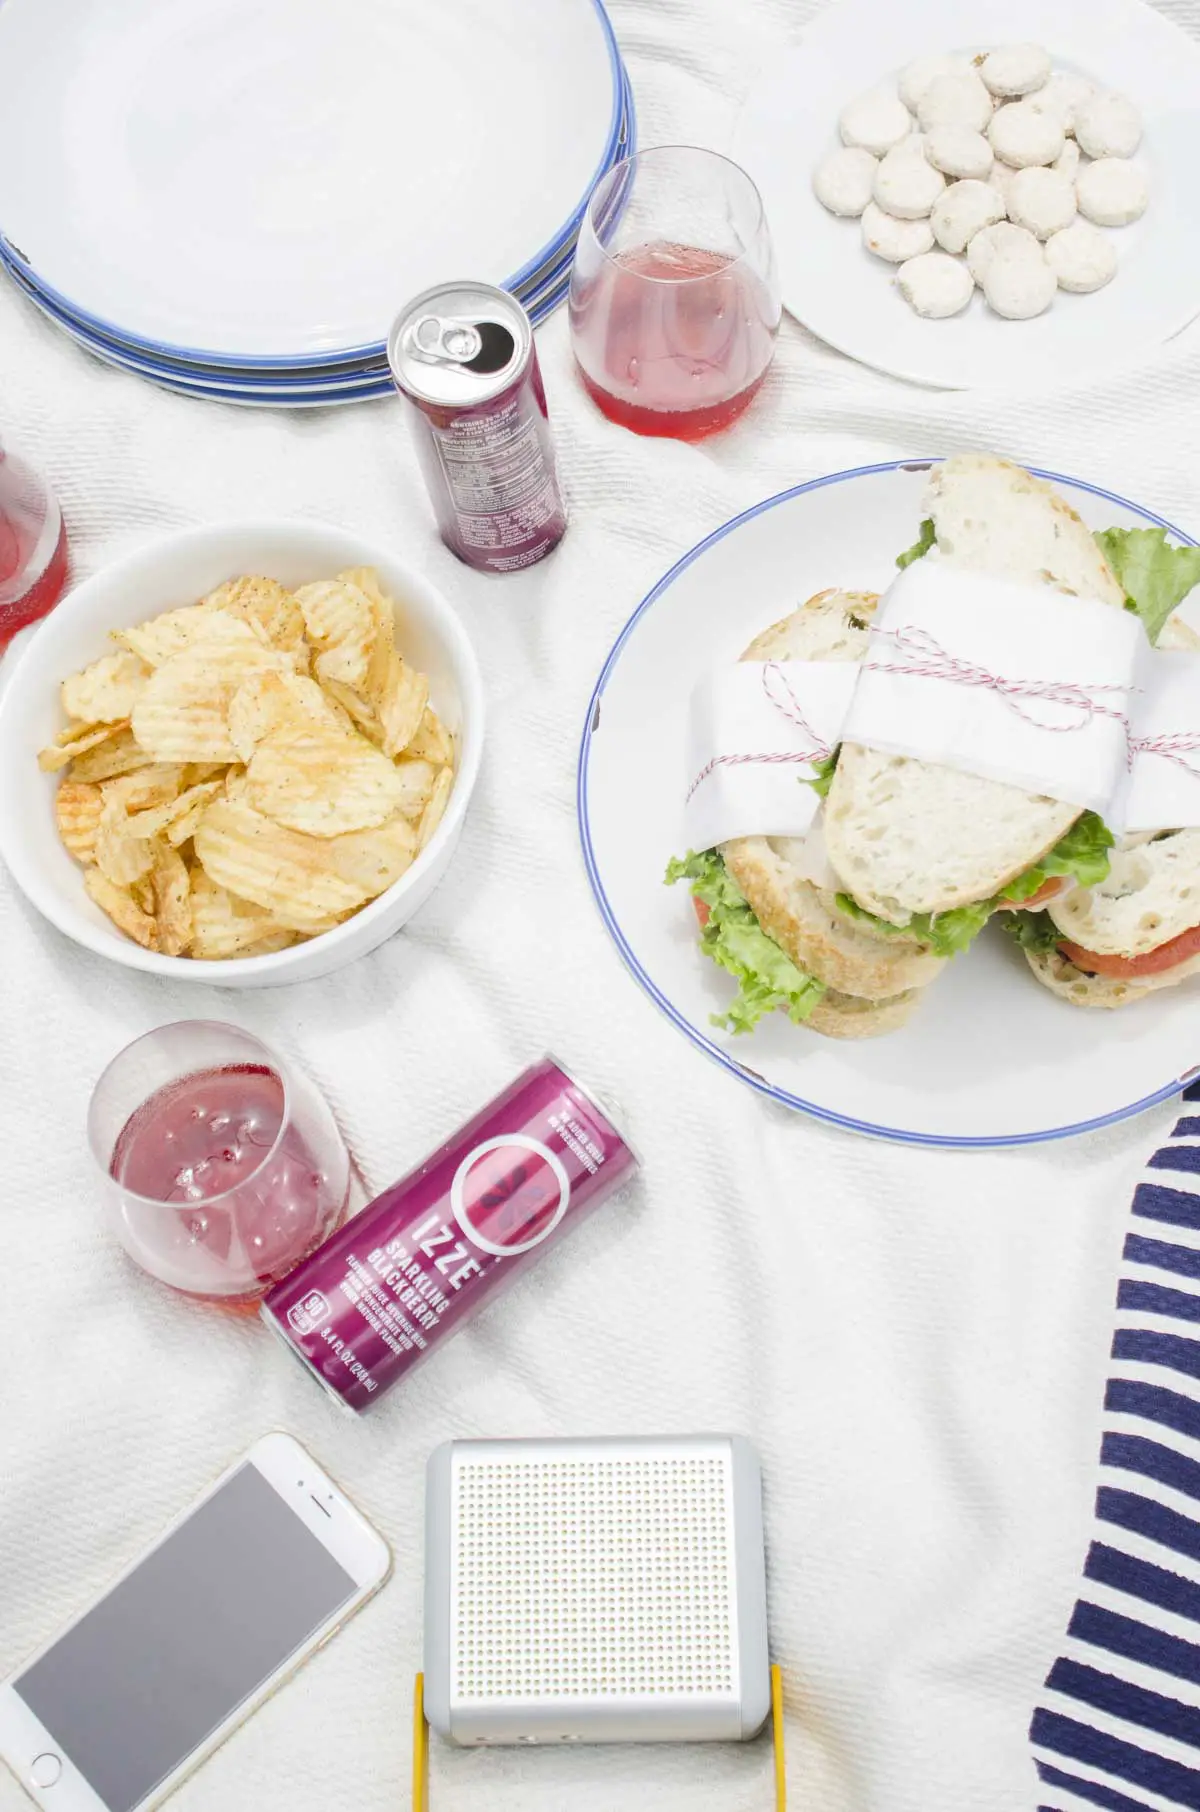 Modern picnic lunch with geometric picnic blanket on @thouswellblog